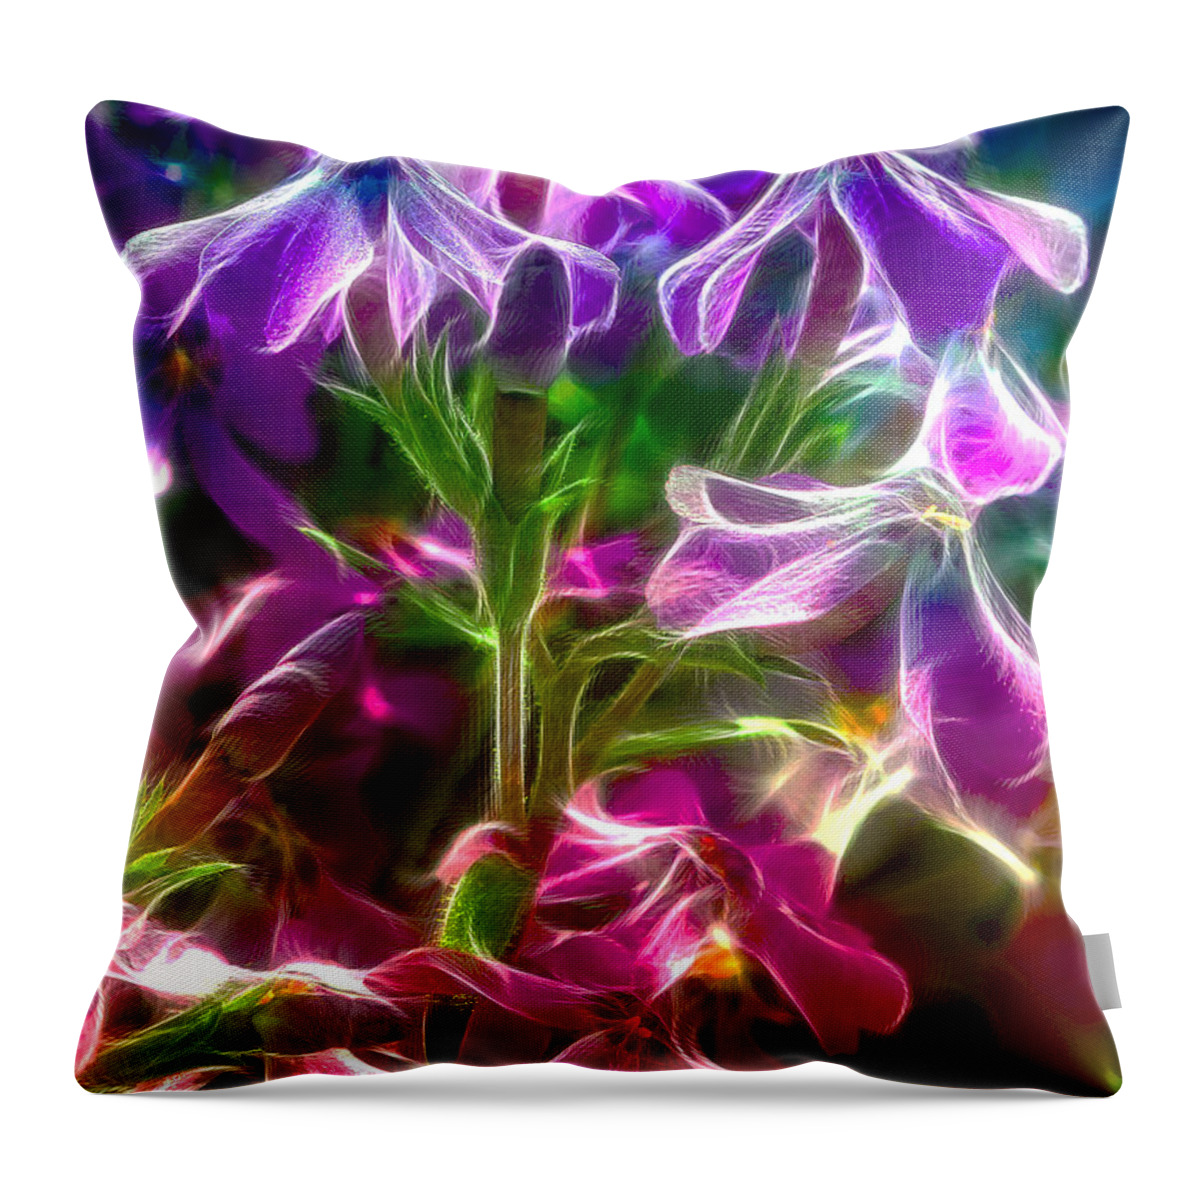 Flowers Throw Pillow featuring the photograph Ghosting Blooms by Bill and Linda Tiepelman